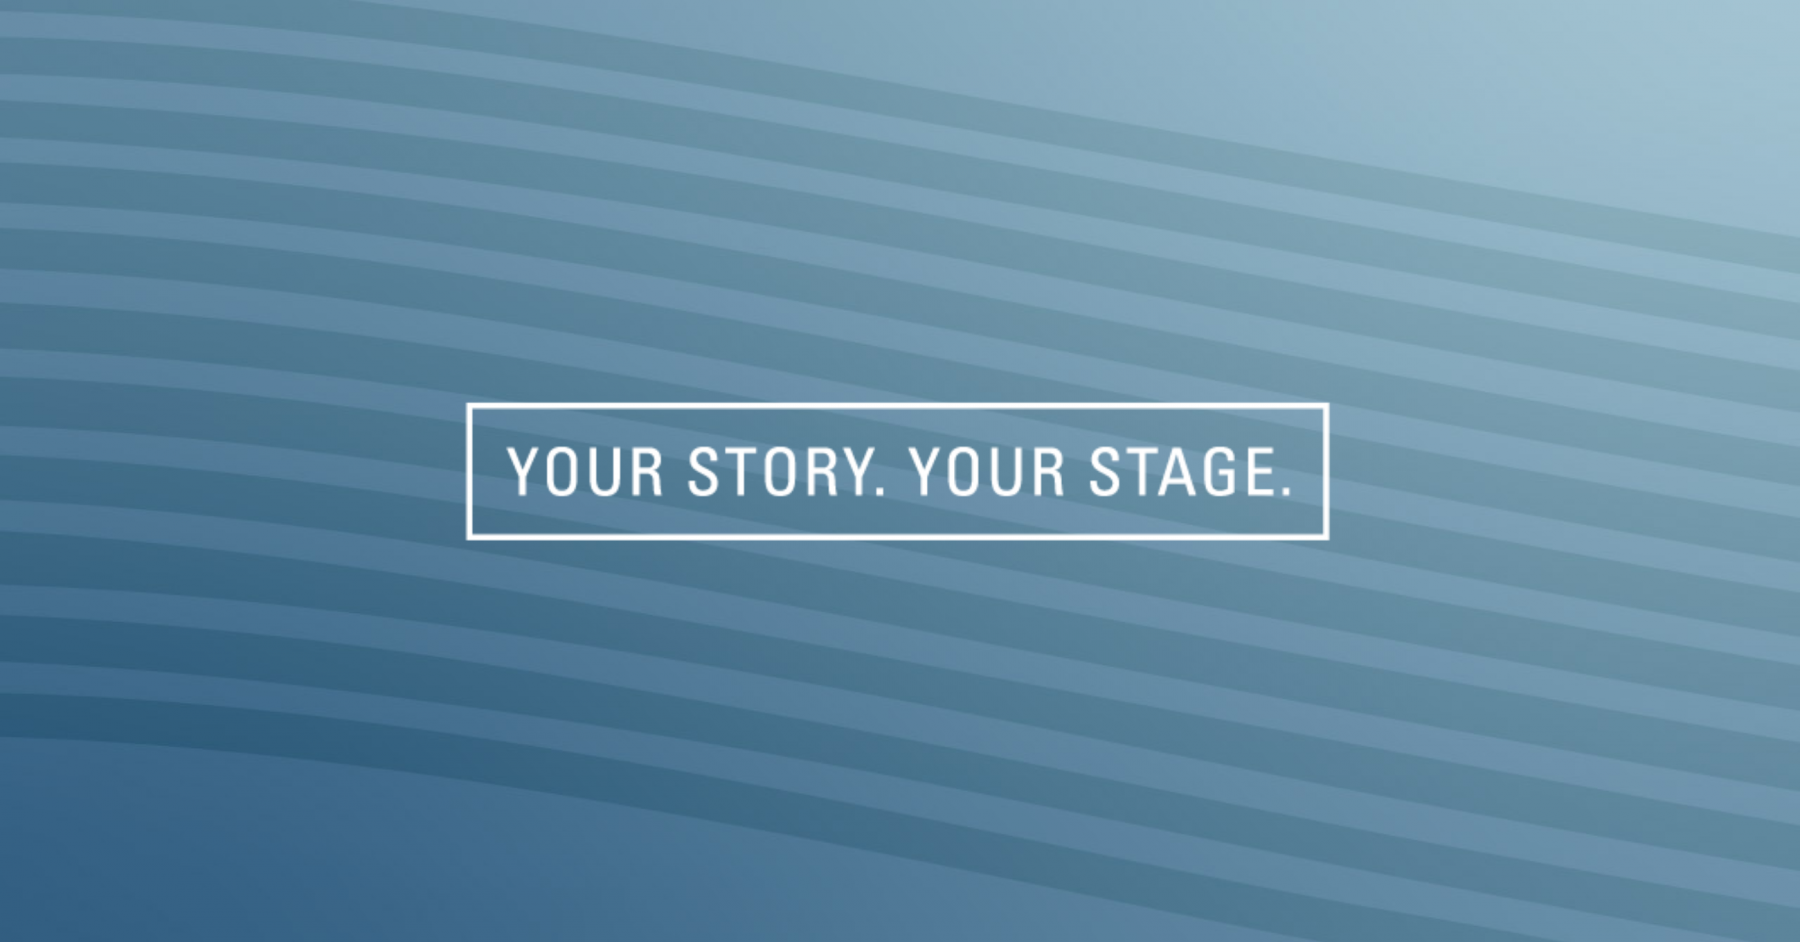 Your Story. Your Stage. Image